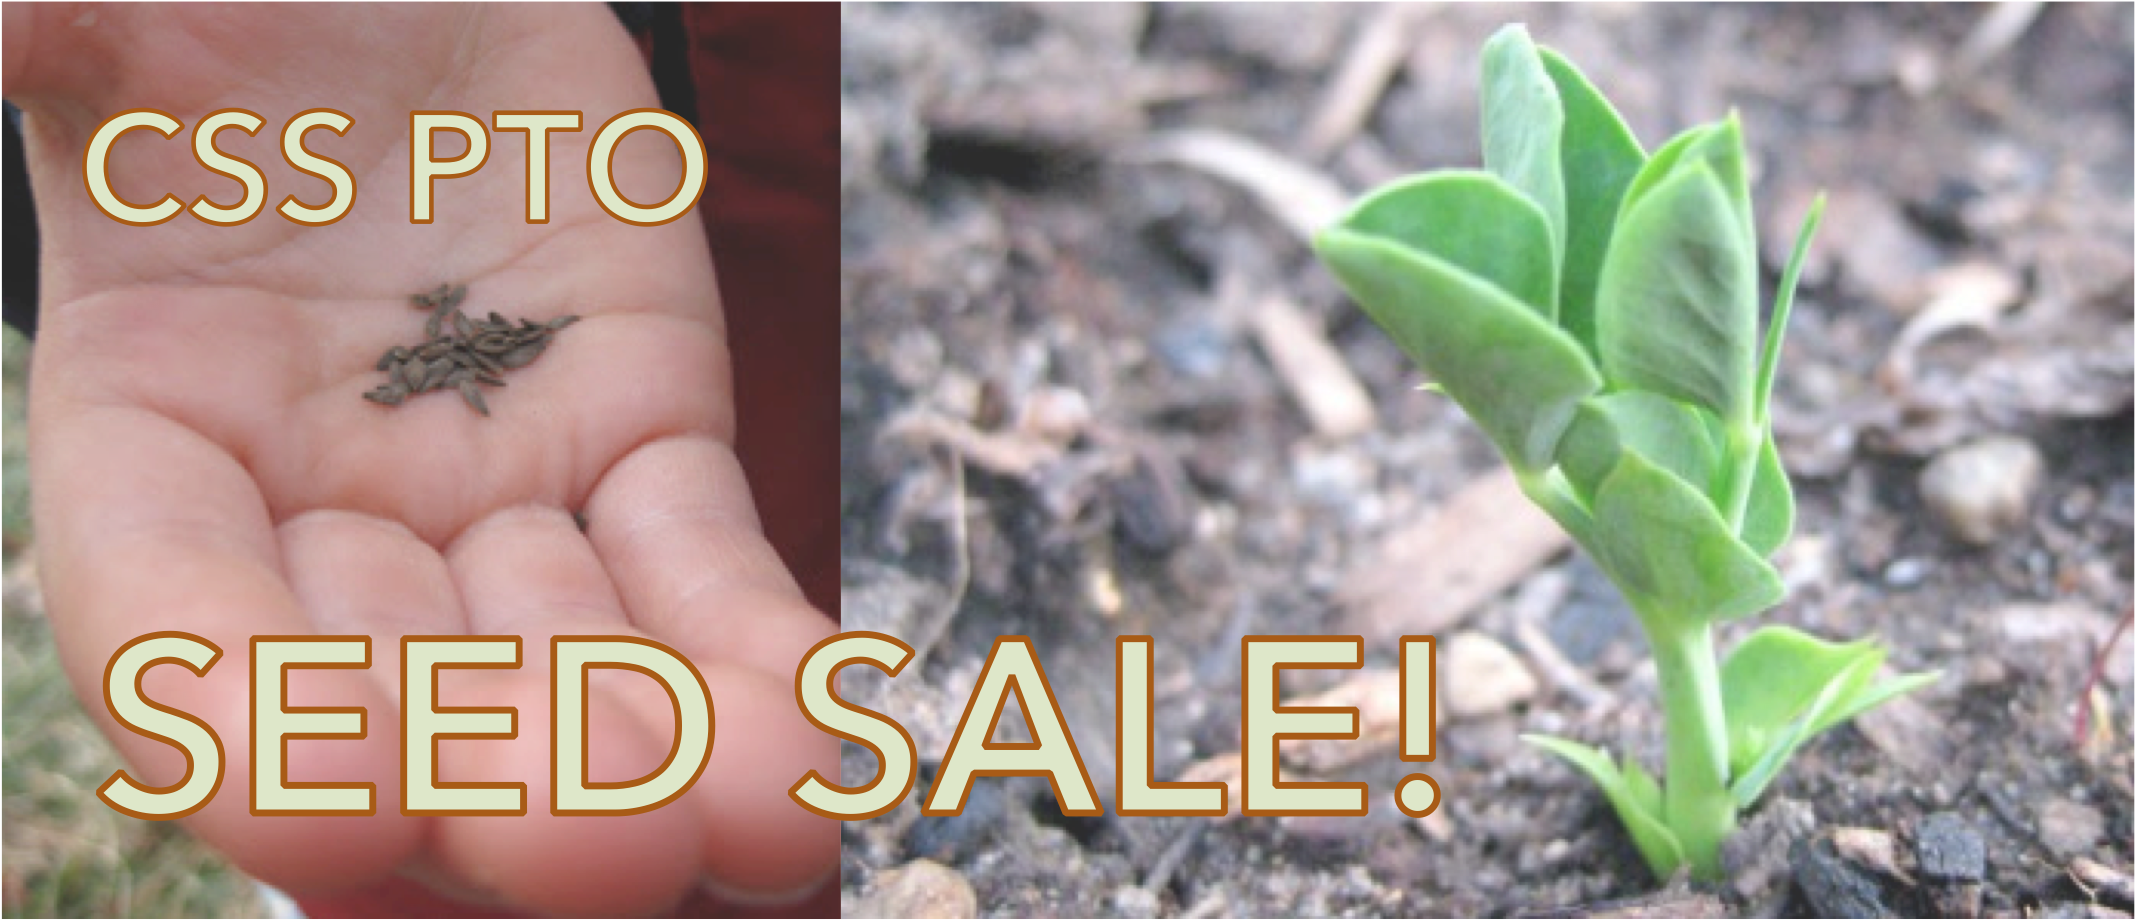 Buy seeds and support PTO!